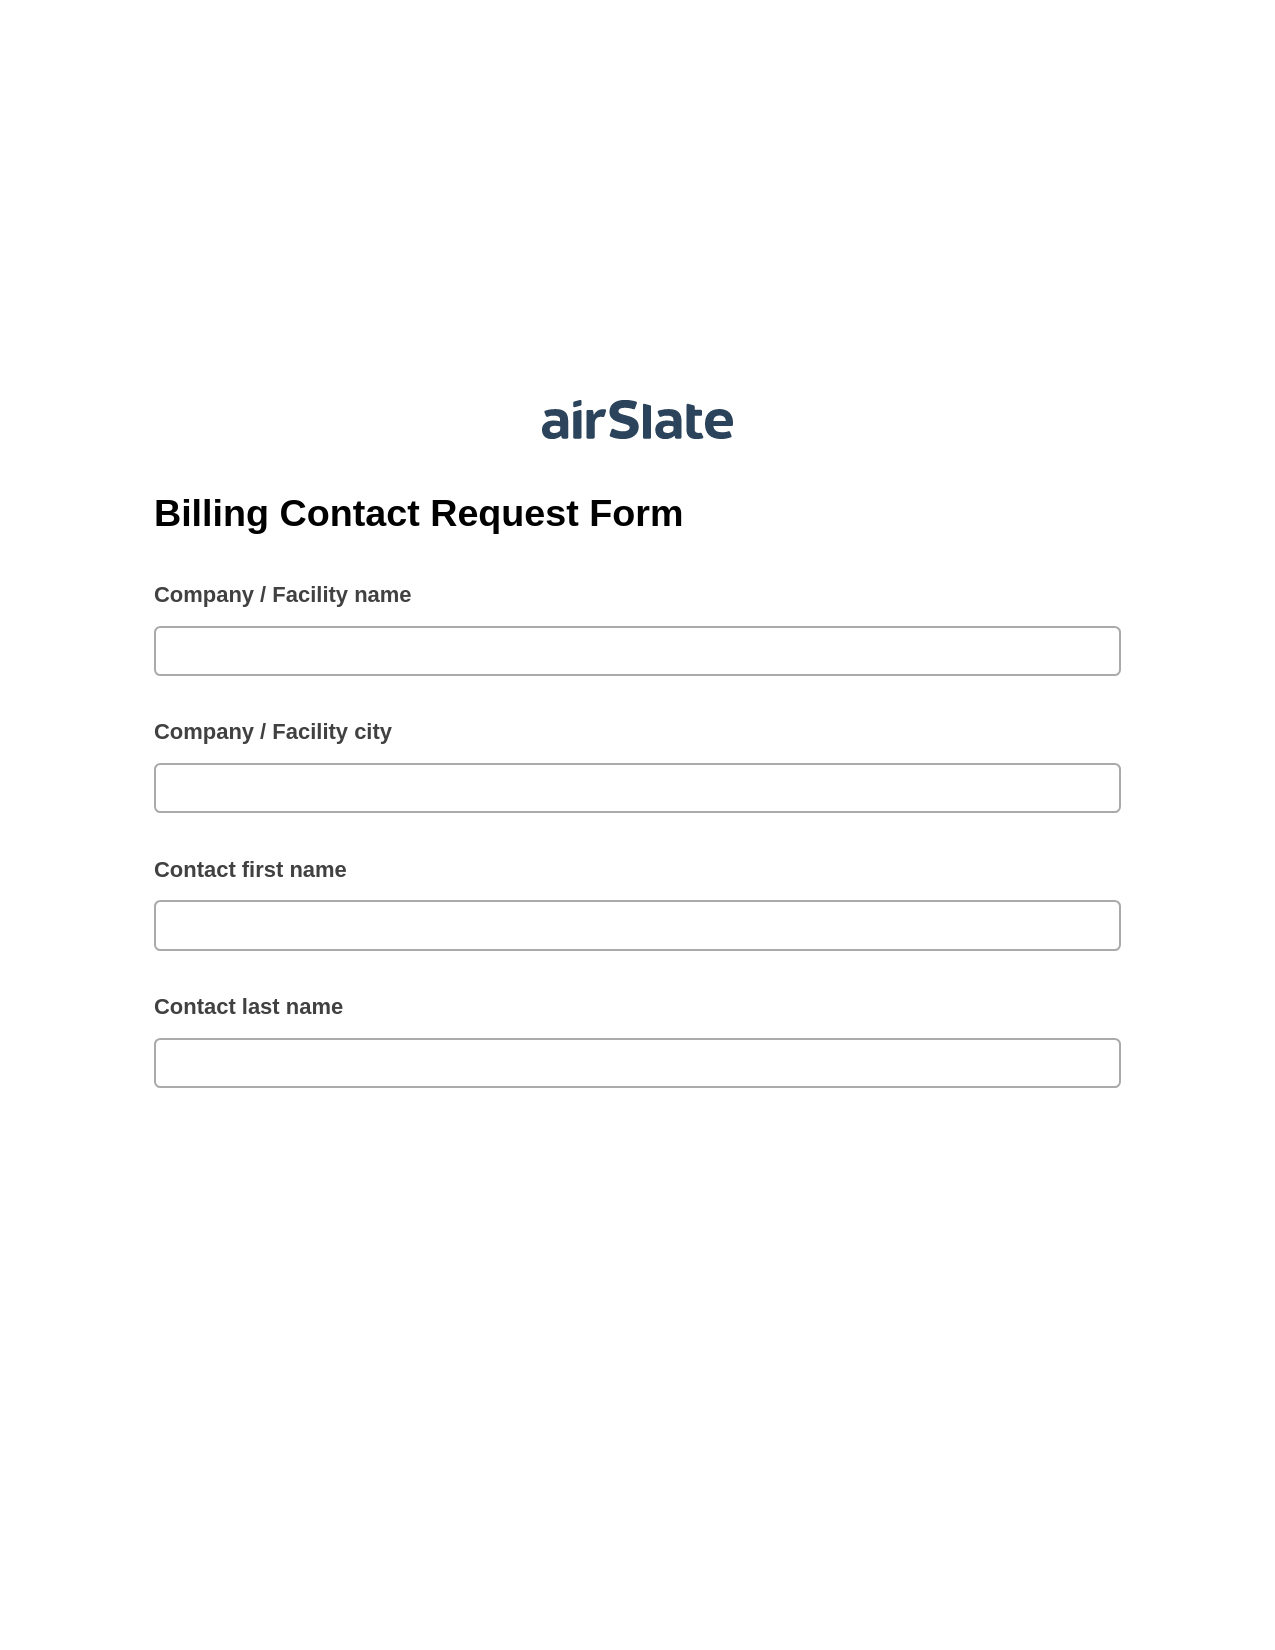 Billing Contact Request Form System Bot - Slack Two-Way Binding Bot, Assign Roles to Recipients Bot, Archive to SharePoint Folder Bot